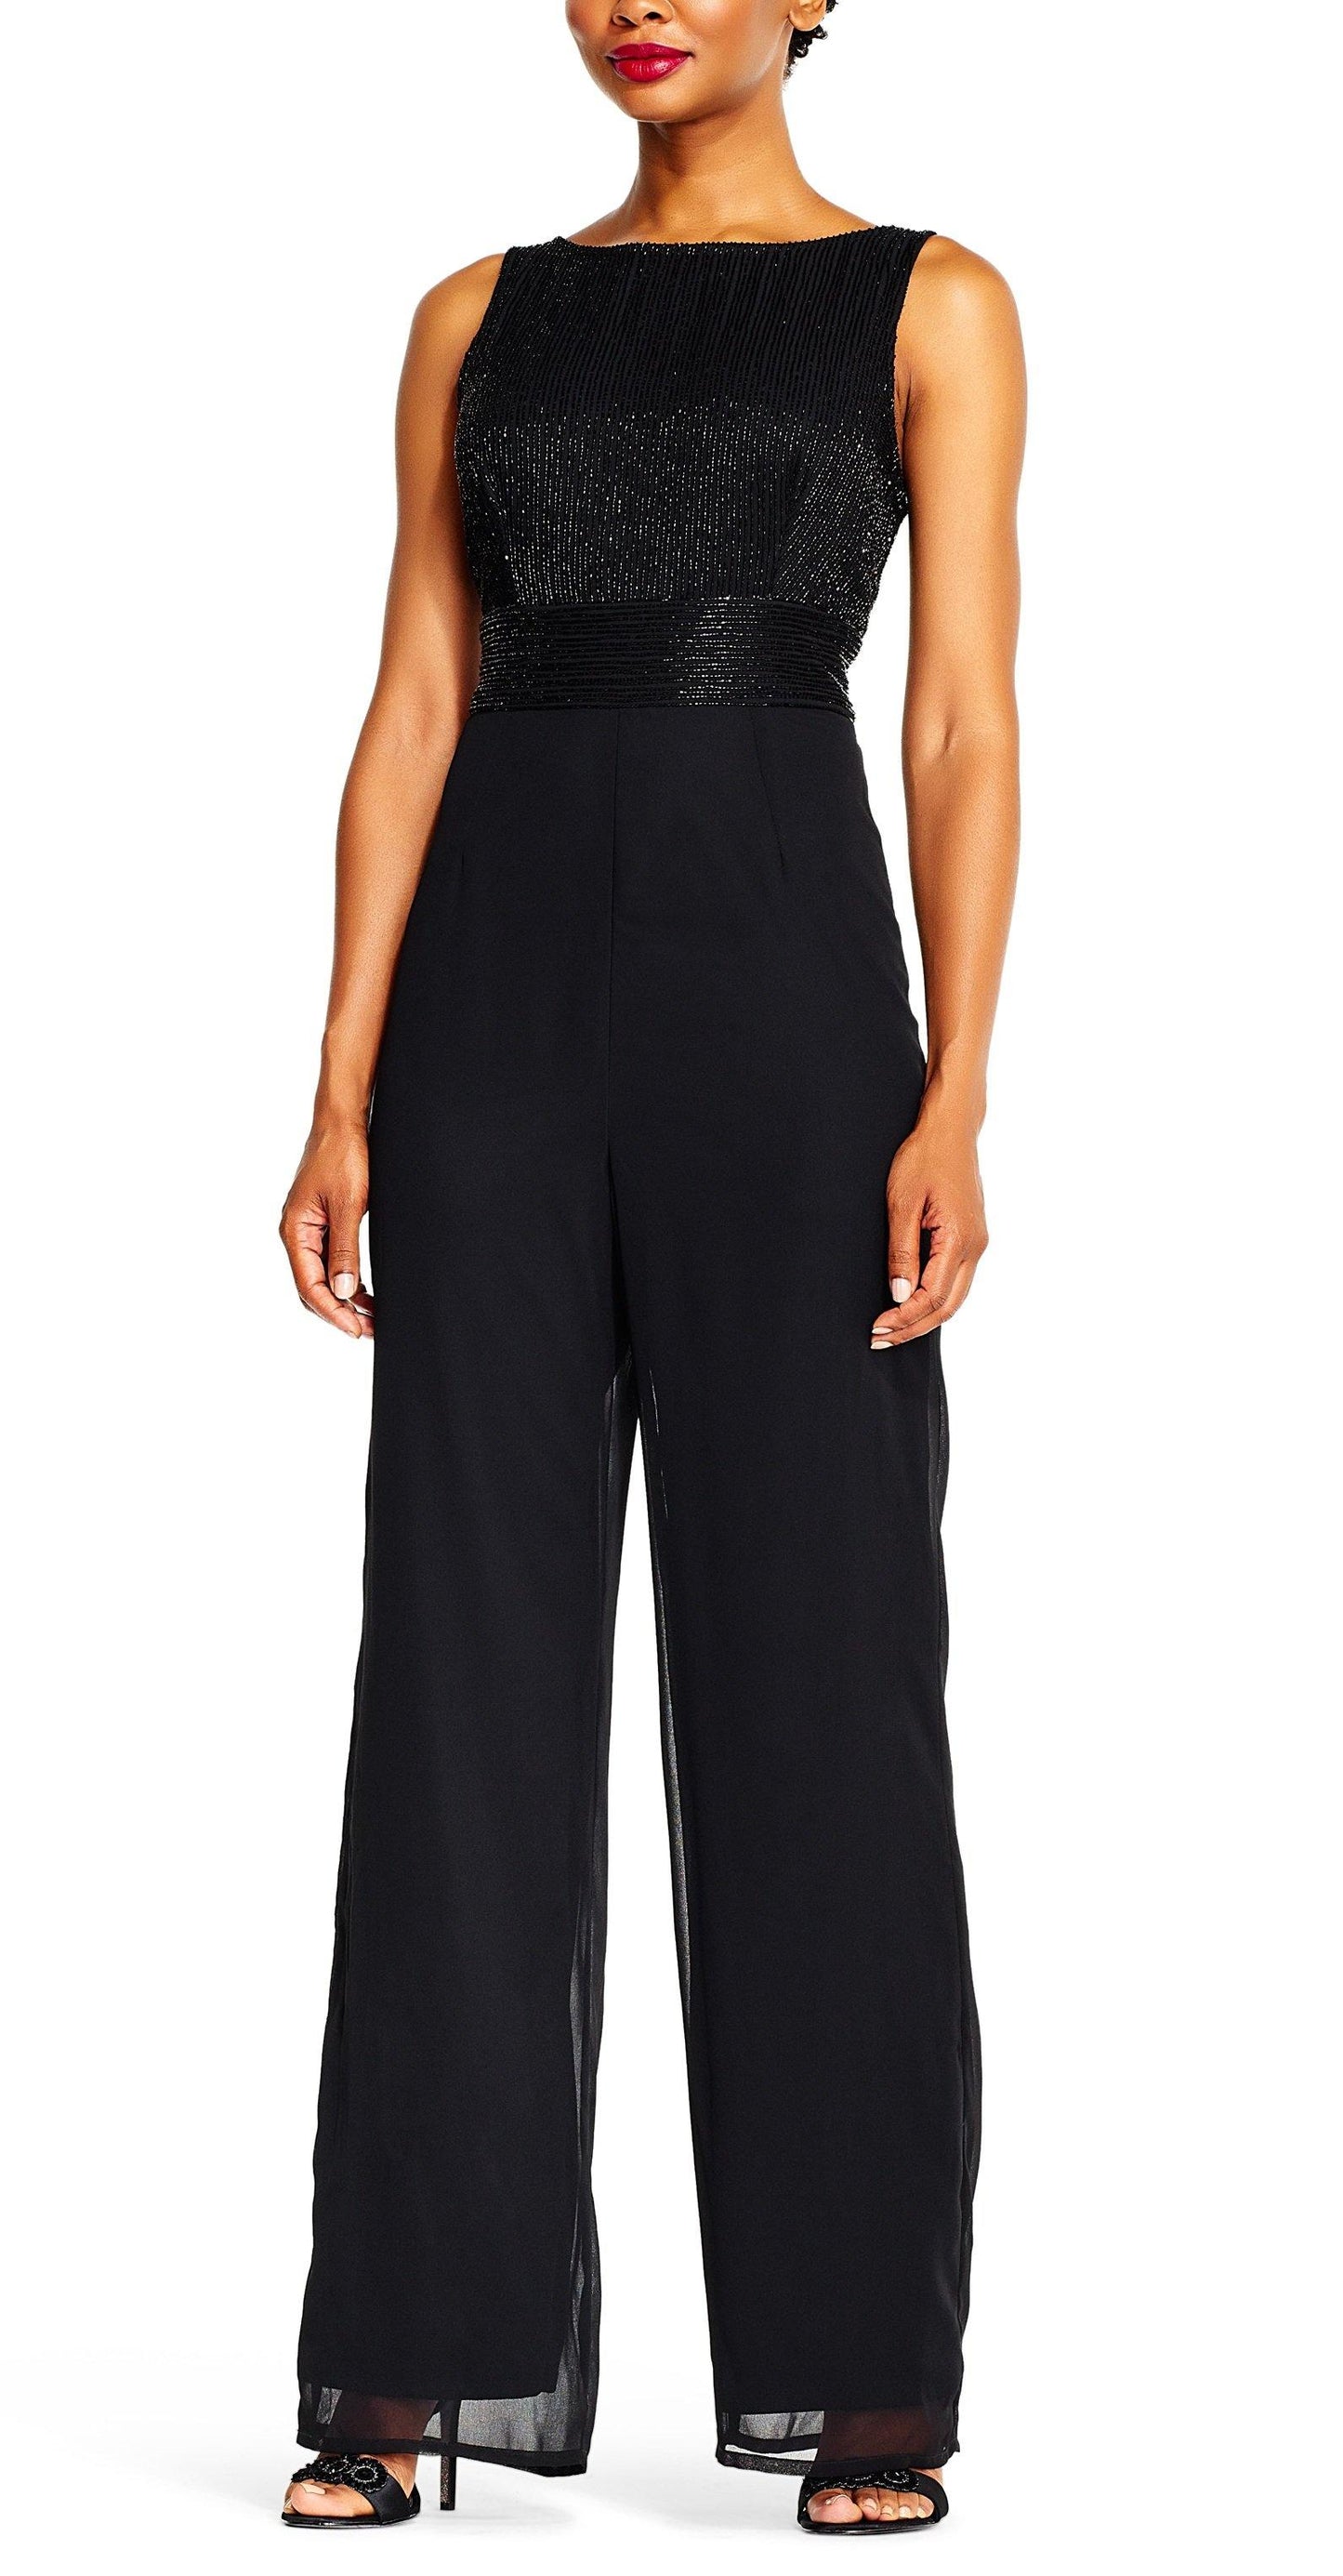 Adrianna Papell Sleeveless Long Formal Chiffon Jumpsuit - The Dress Outlet Adrianna Papell